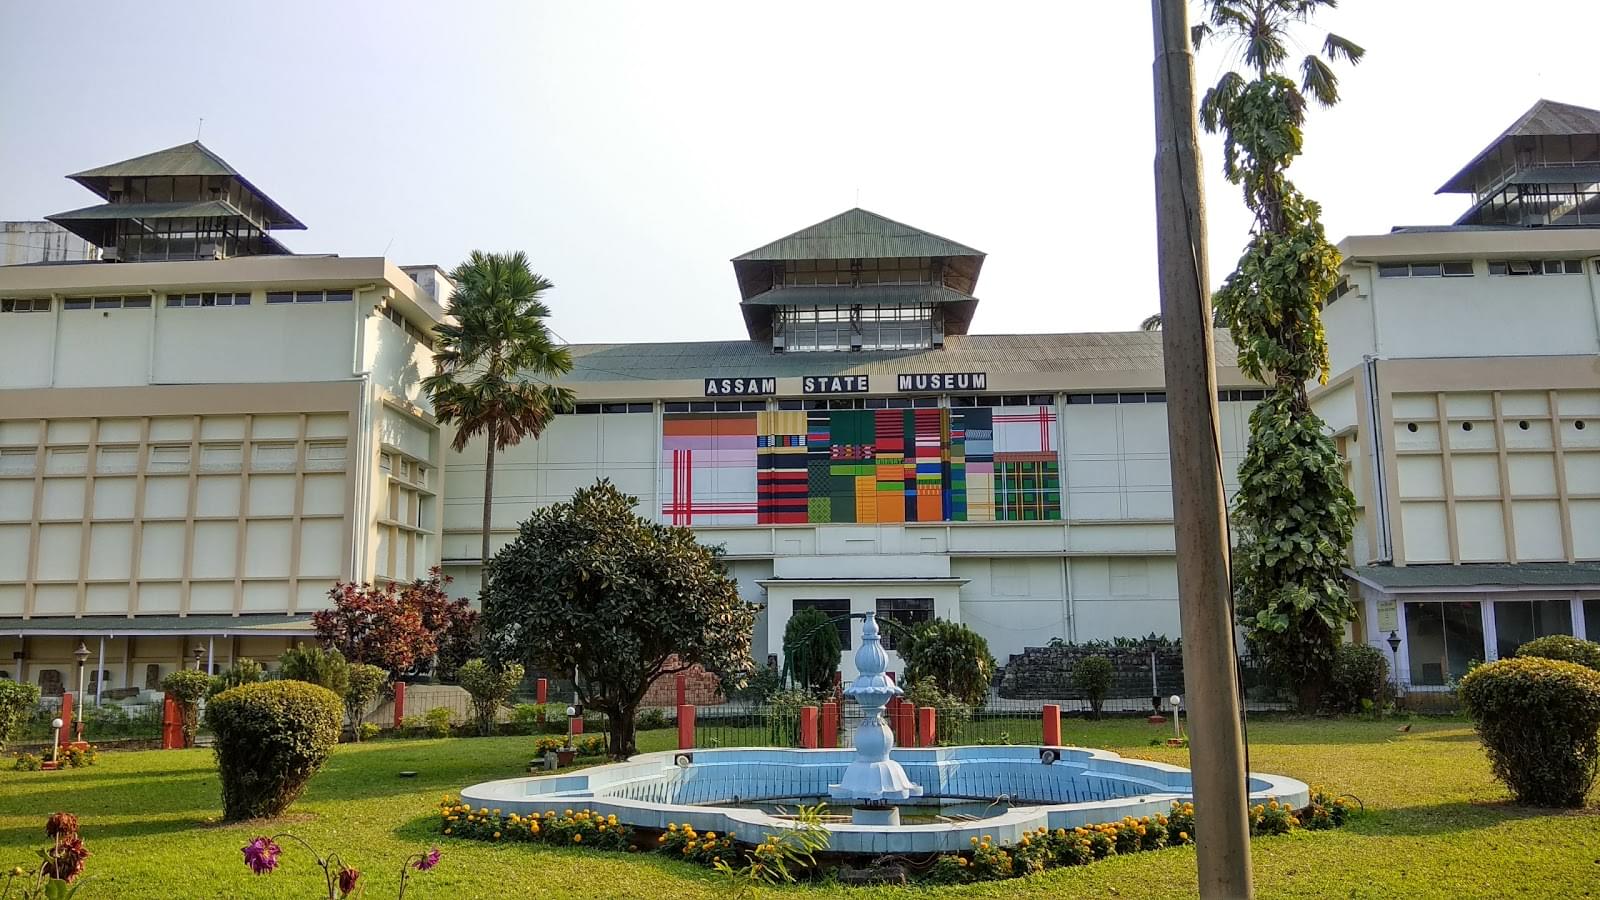 Assam State Museum Overview